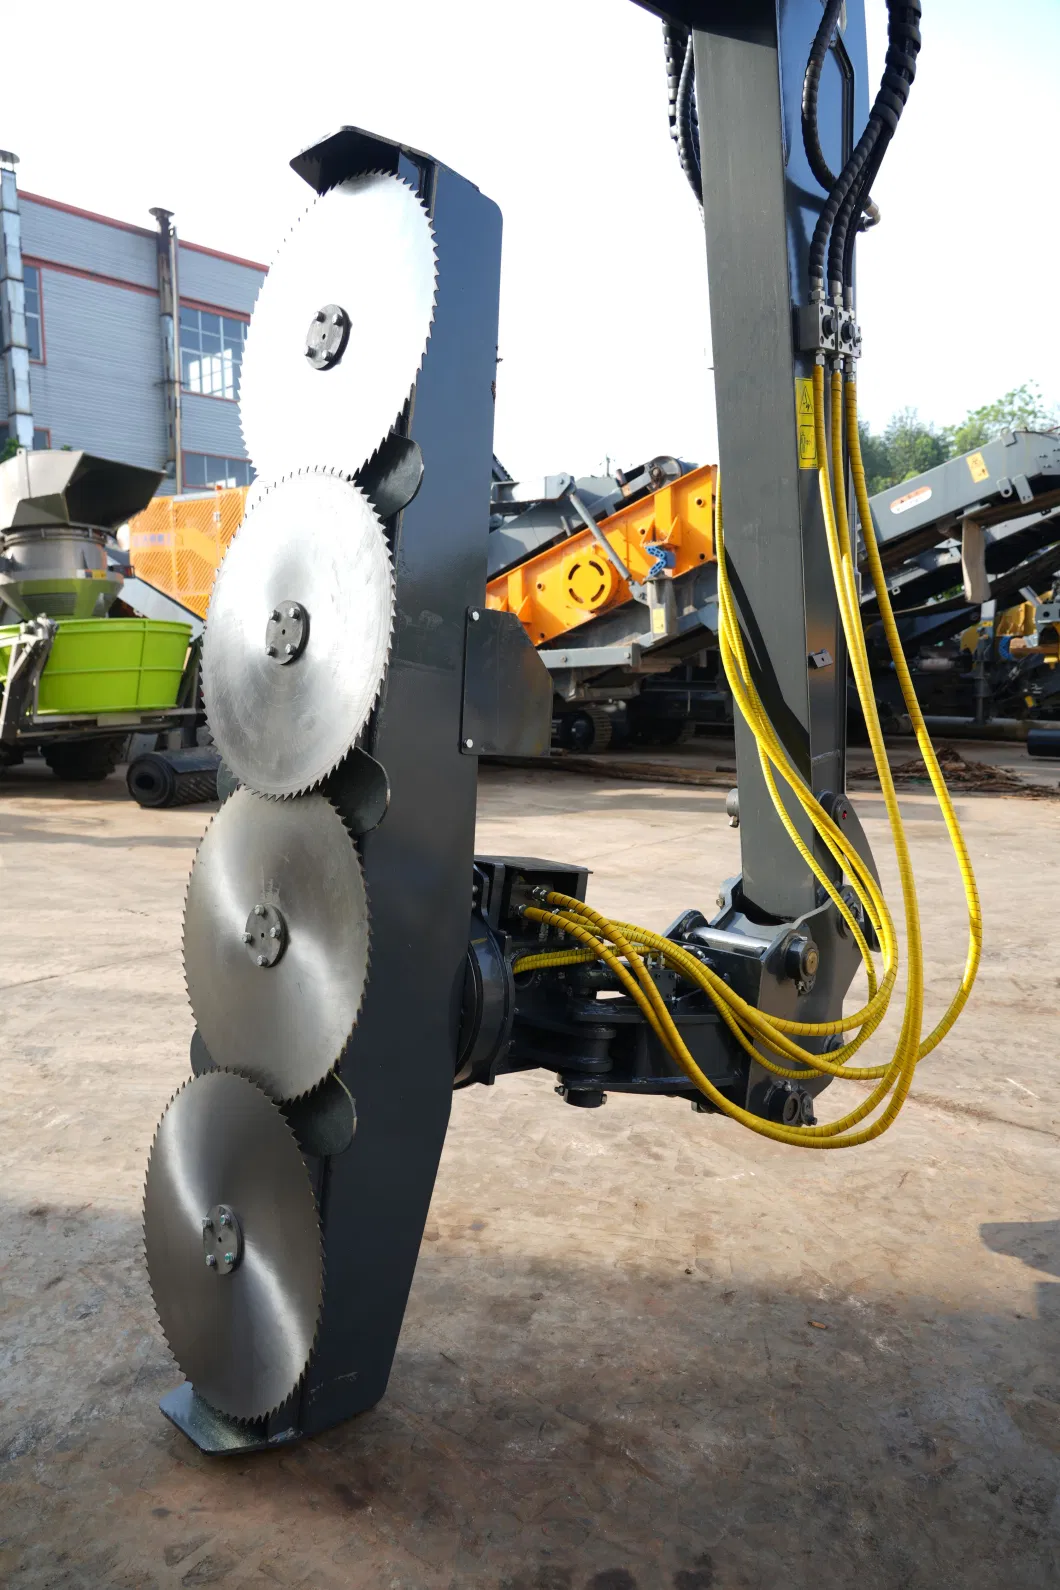 90 Degree Swing Tree Shear with 4 Saw Discs Easy to Cut Branch Tree Trimming Cutting Machine